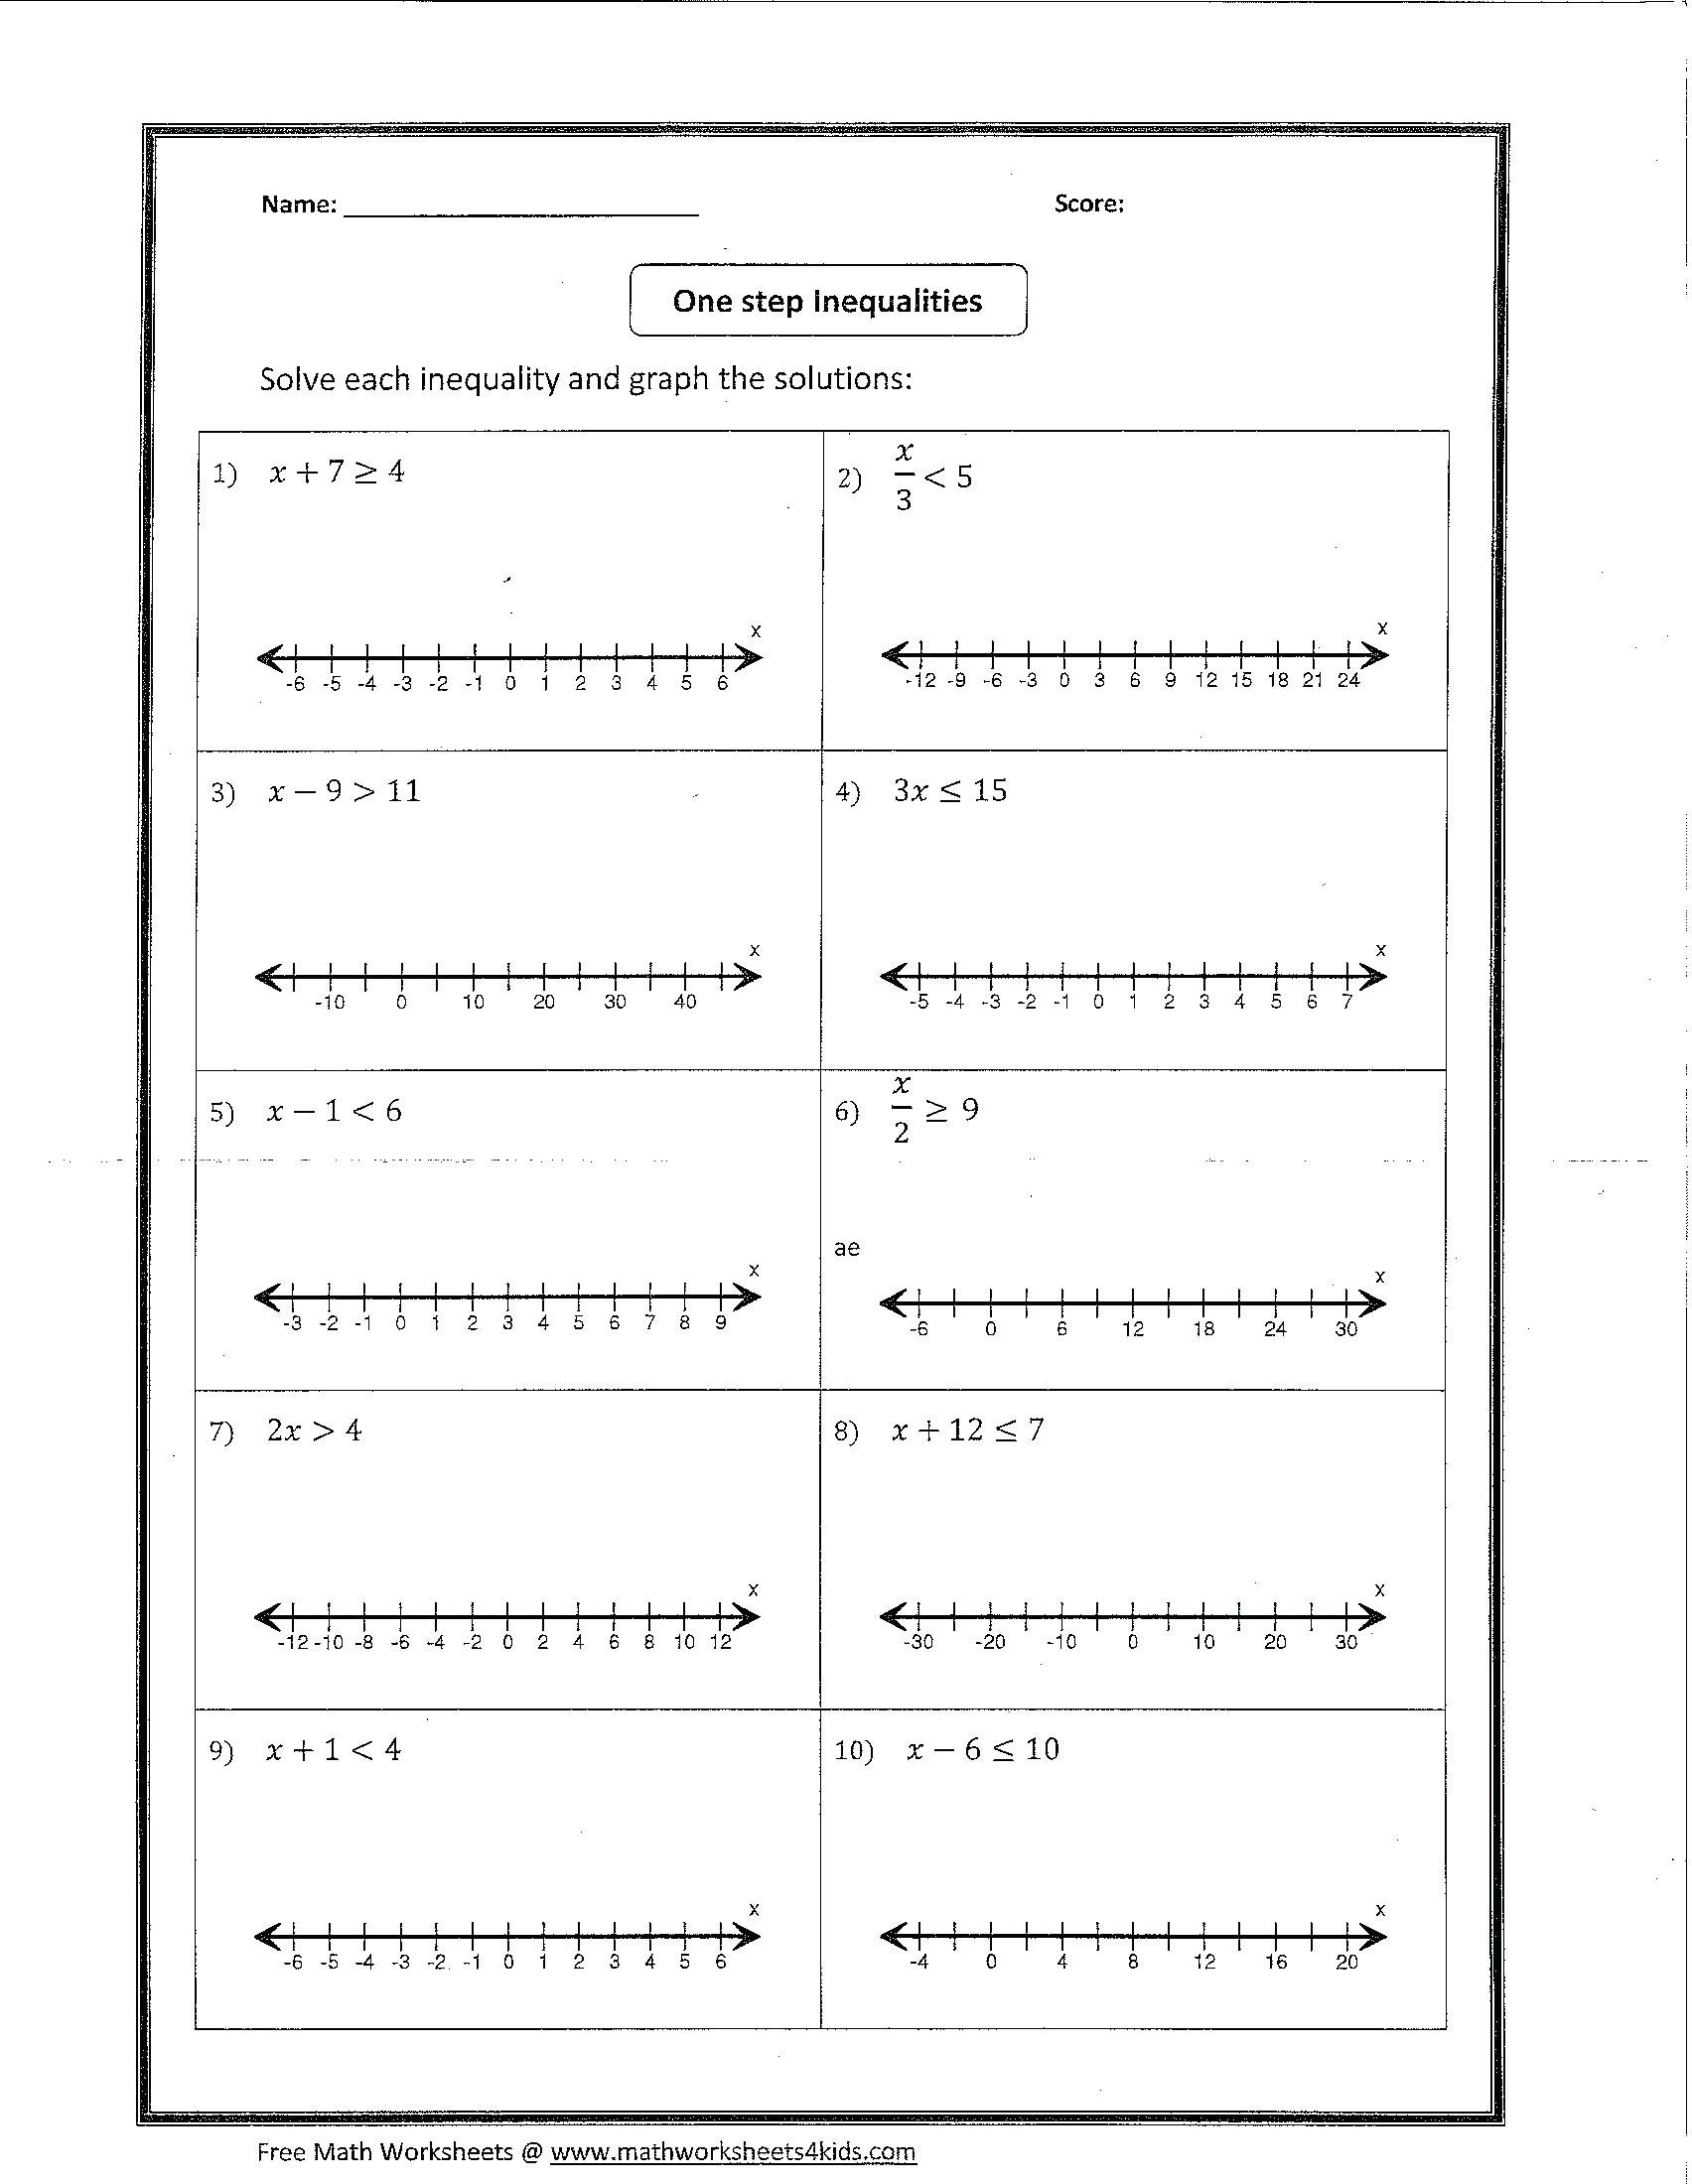 2 Step Inequality Word Problems Math – Minhasaudeclub For Inequality Word Problems Worksheet Algebra 1 Answers